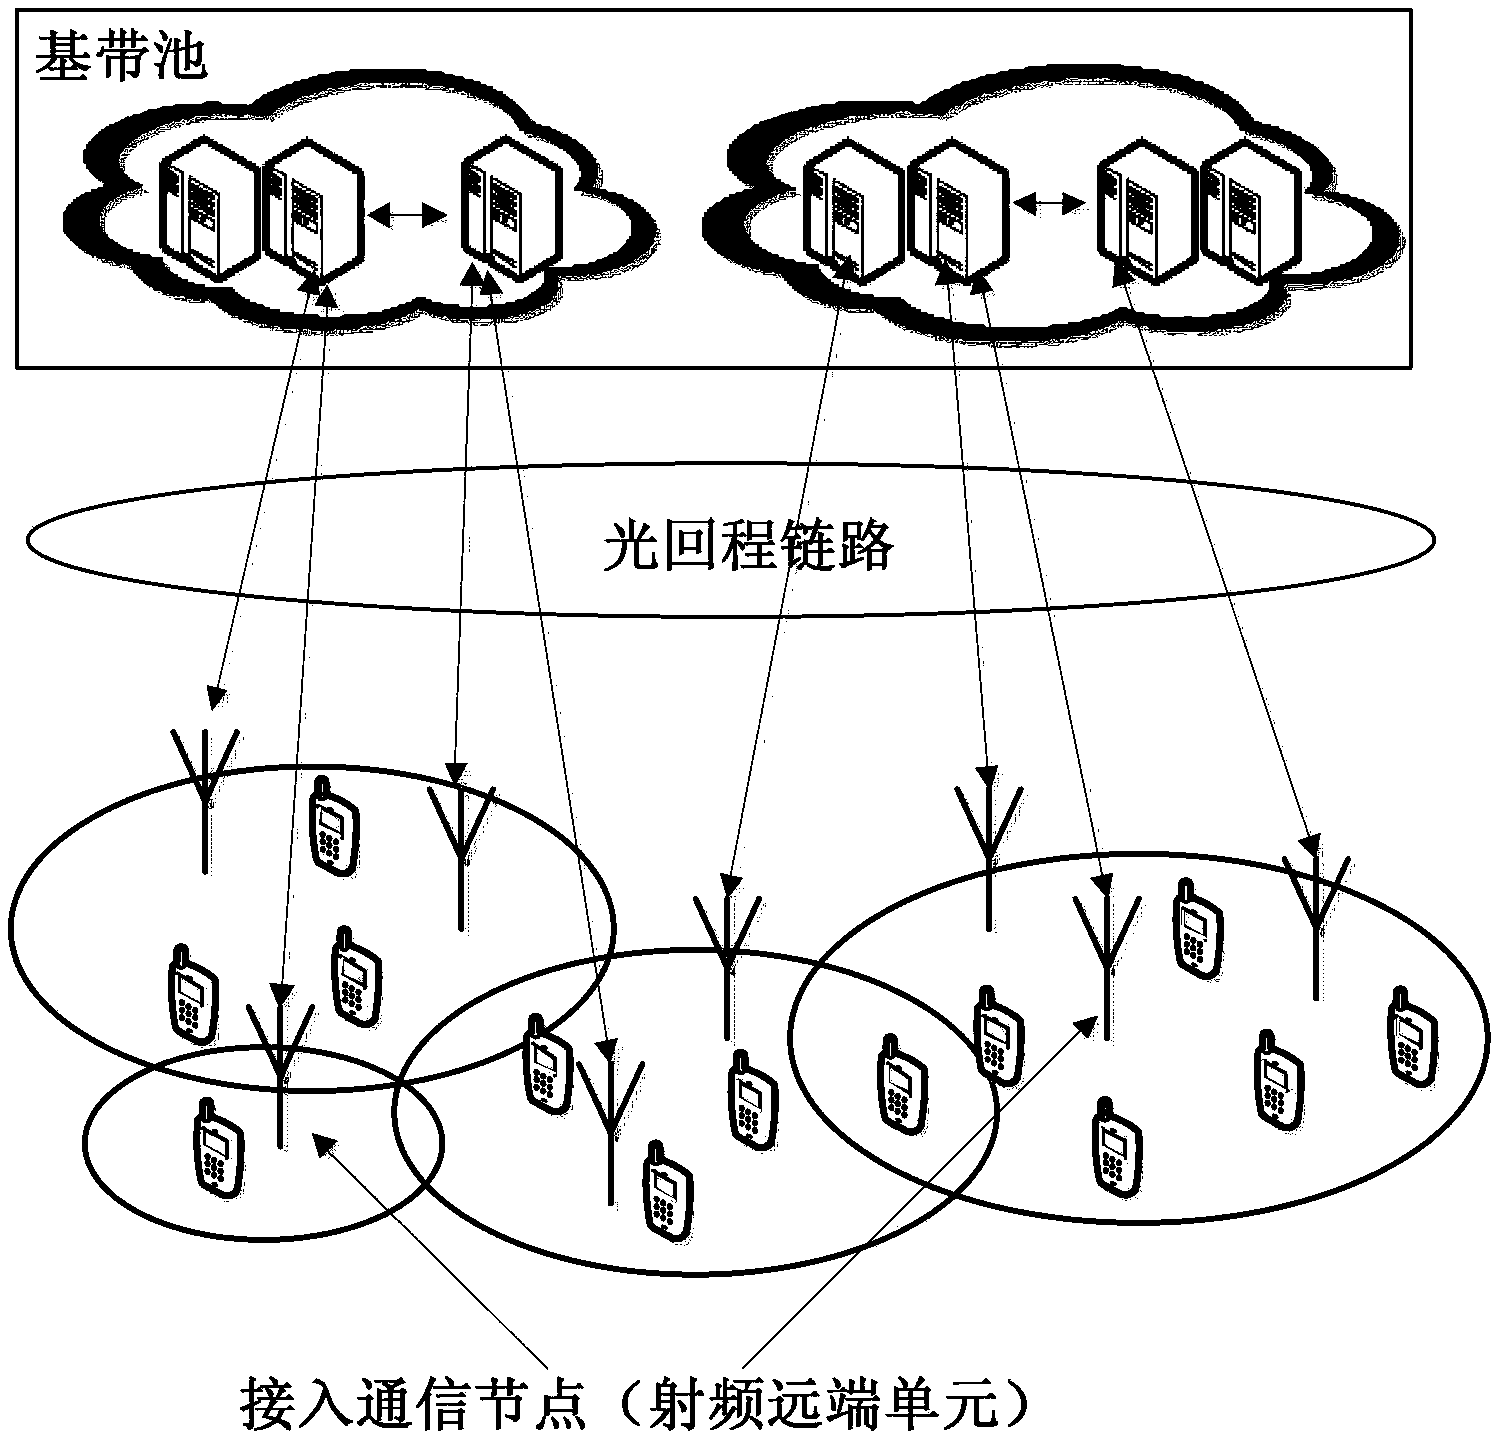 Self-adaptive networking method based on baseband with large-scale processing ability and business